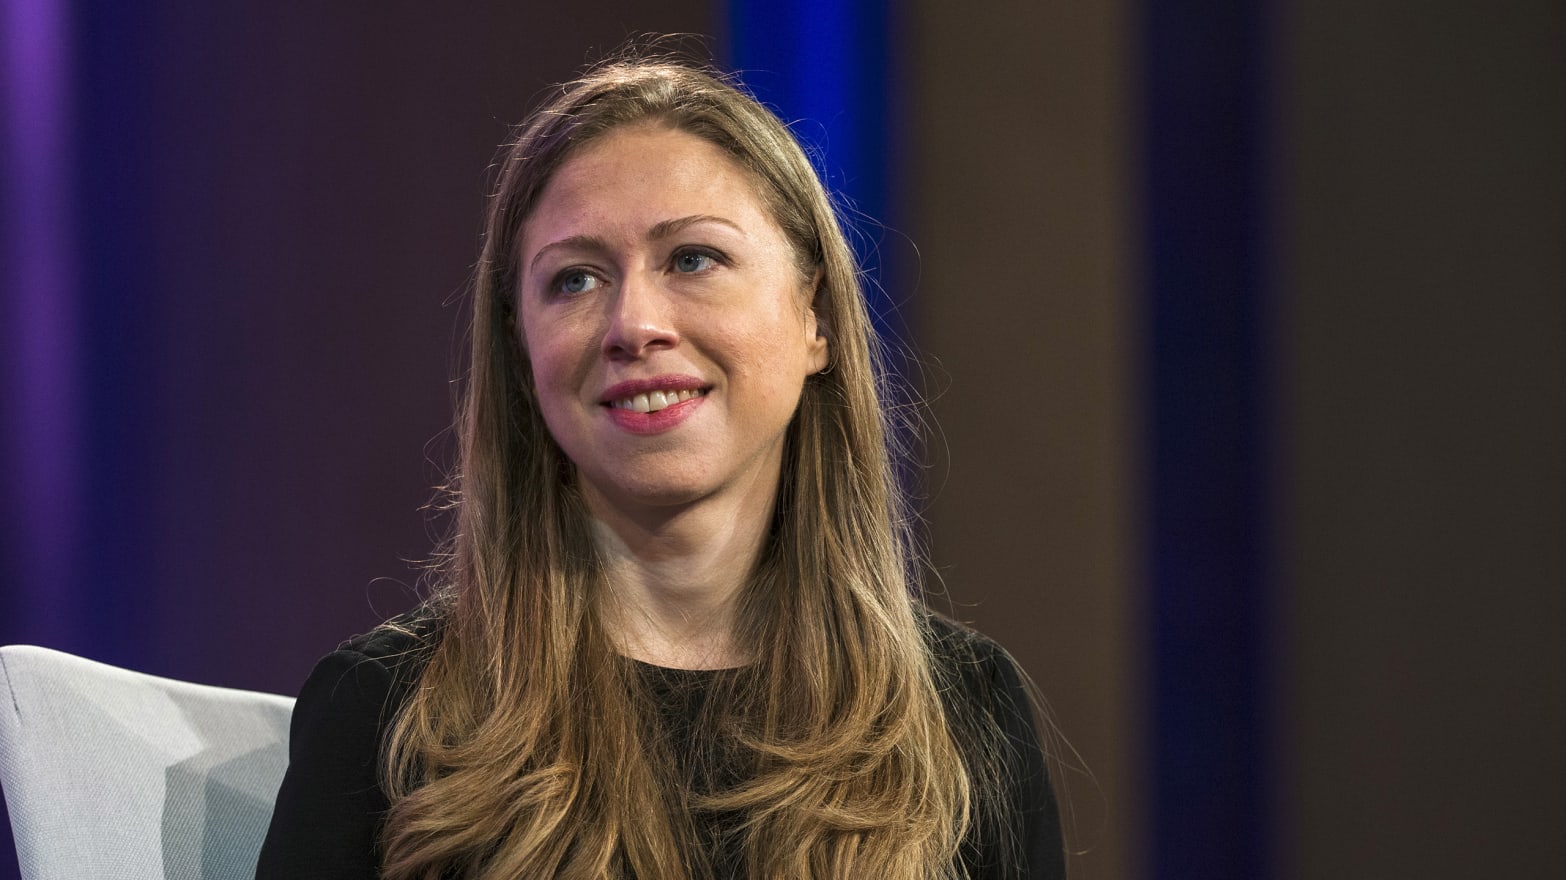 Inside The Slimy World Of Chelsea Clinton Conspiracy Theories